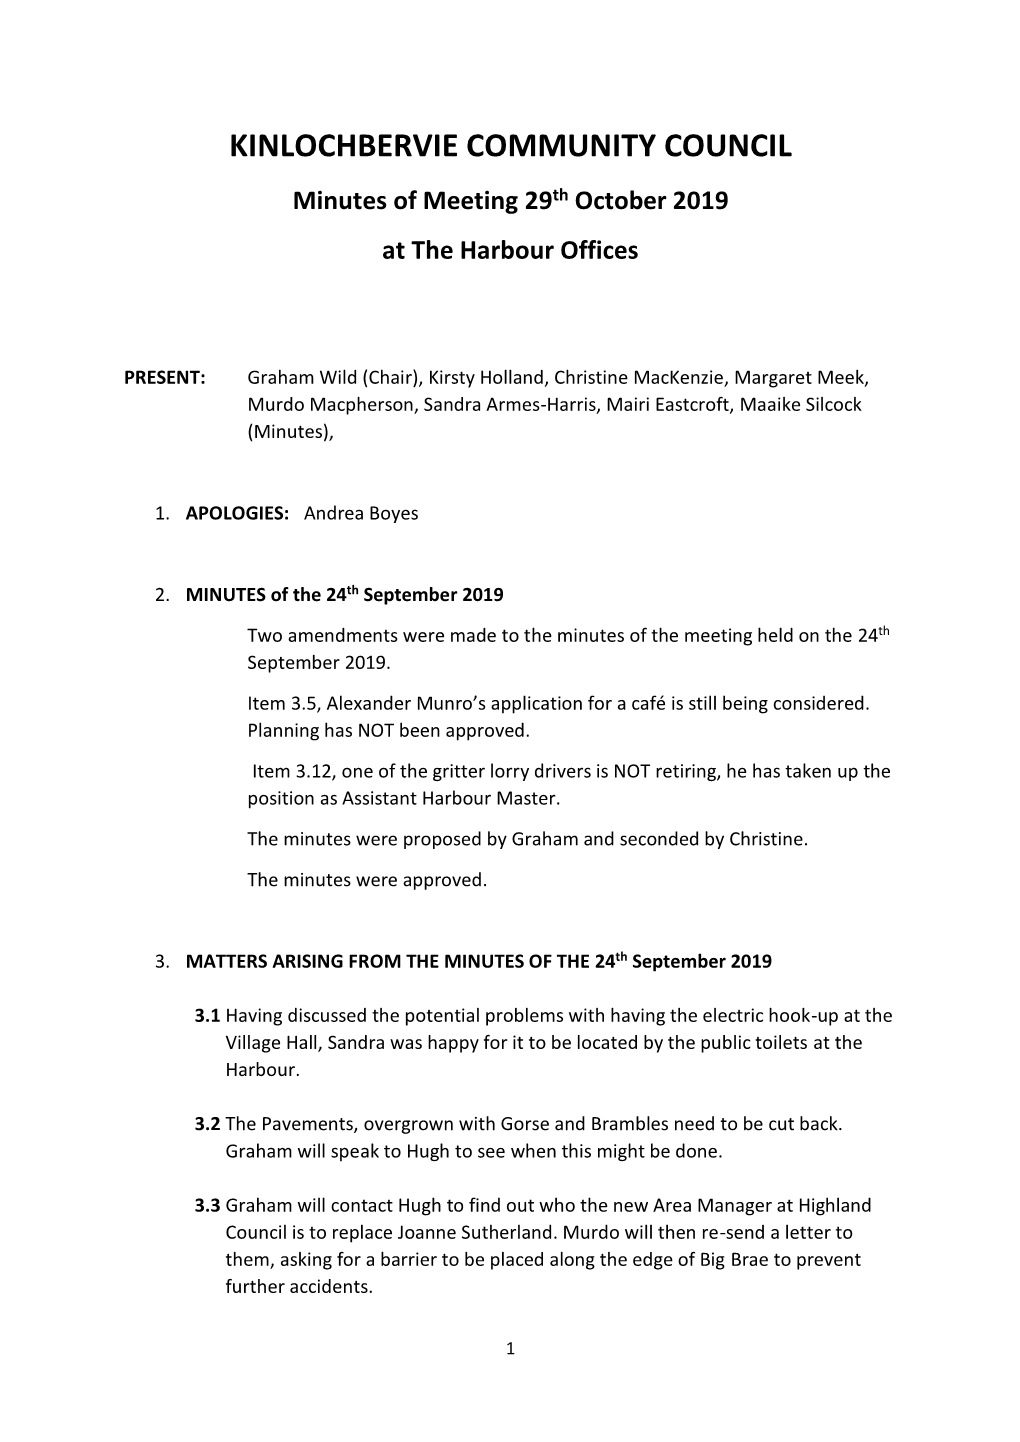 KINLOCHBERVIE COMMUNITY COUNCIL Minutes of Meeting 29Th October 2019 at the Harbour Offices